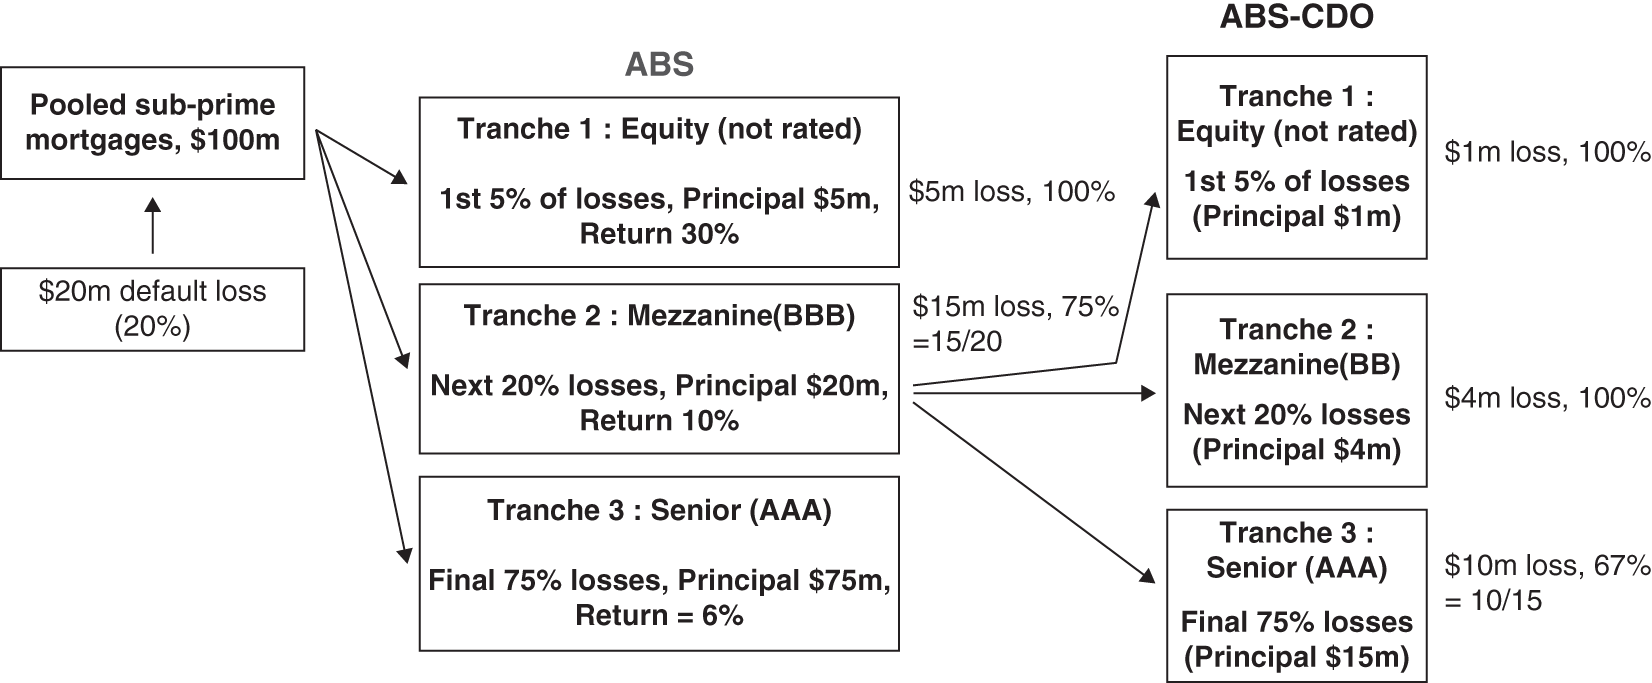 Illustration of leveraged losses depicting the risk in the mezzanine tranches of an ABS bundled up into three further tranches, an ABS-CDO.